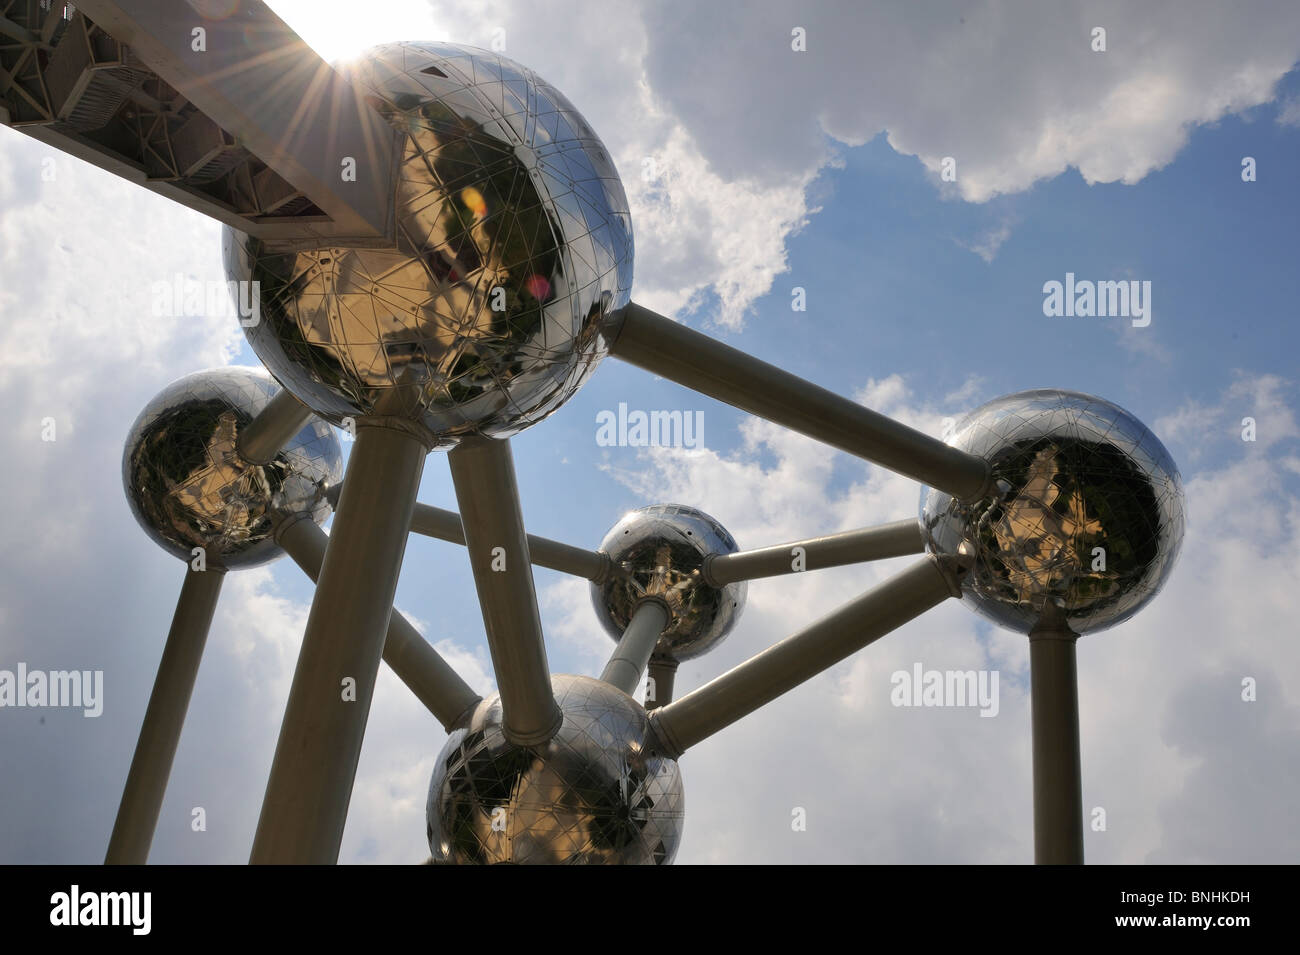 Atomium Brussels Belgium tourist attraction iconic symbol silver balls. Dramatic sky sun flare clouds Stock Photo